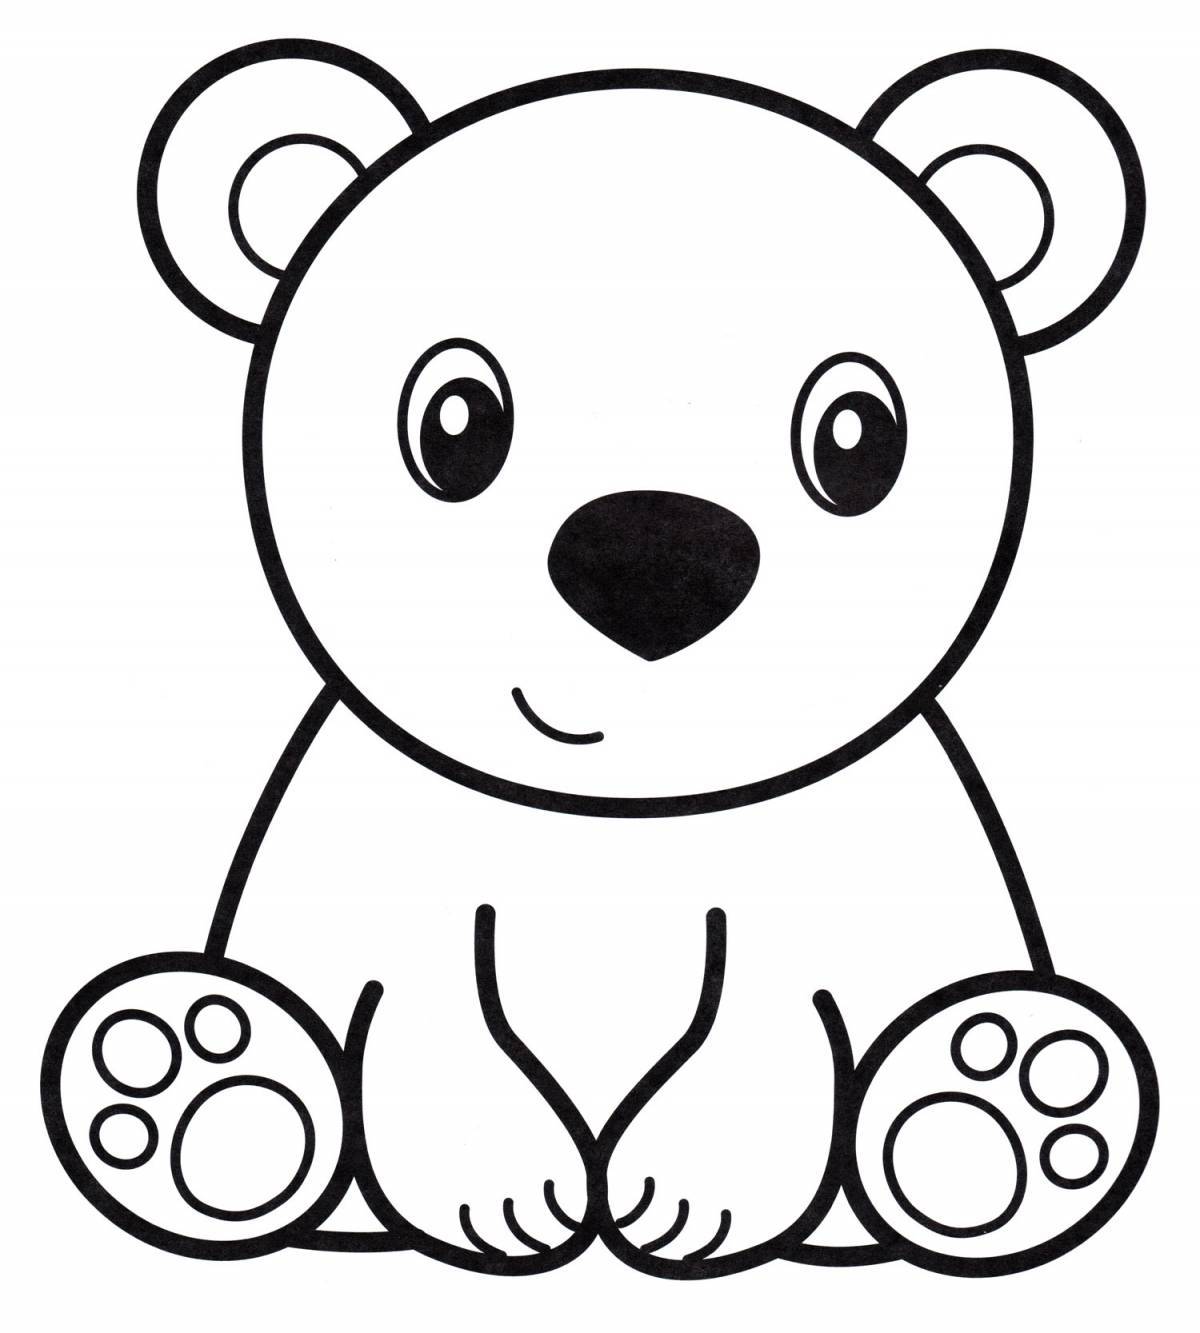 Magic teddy bear coloring page